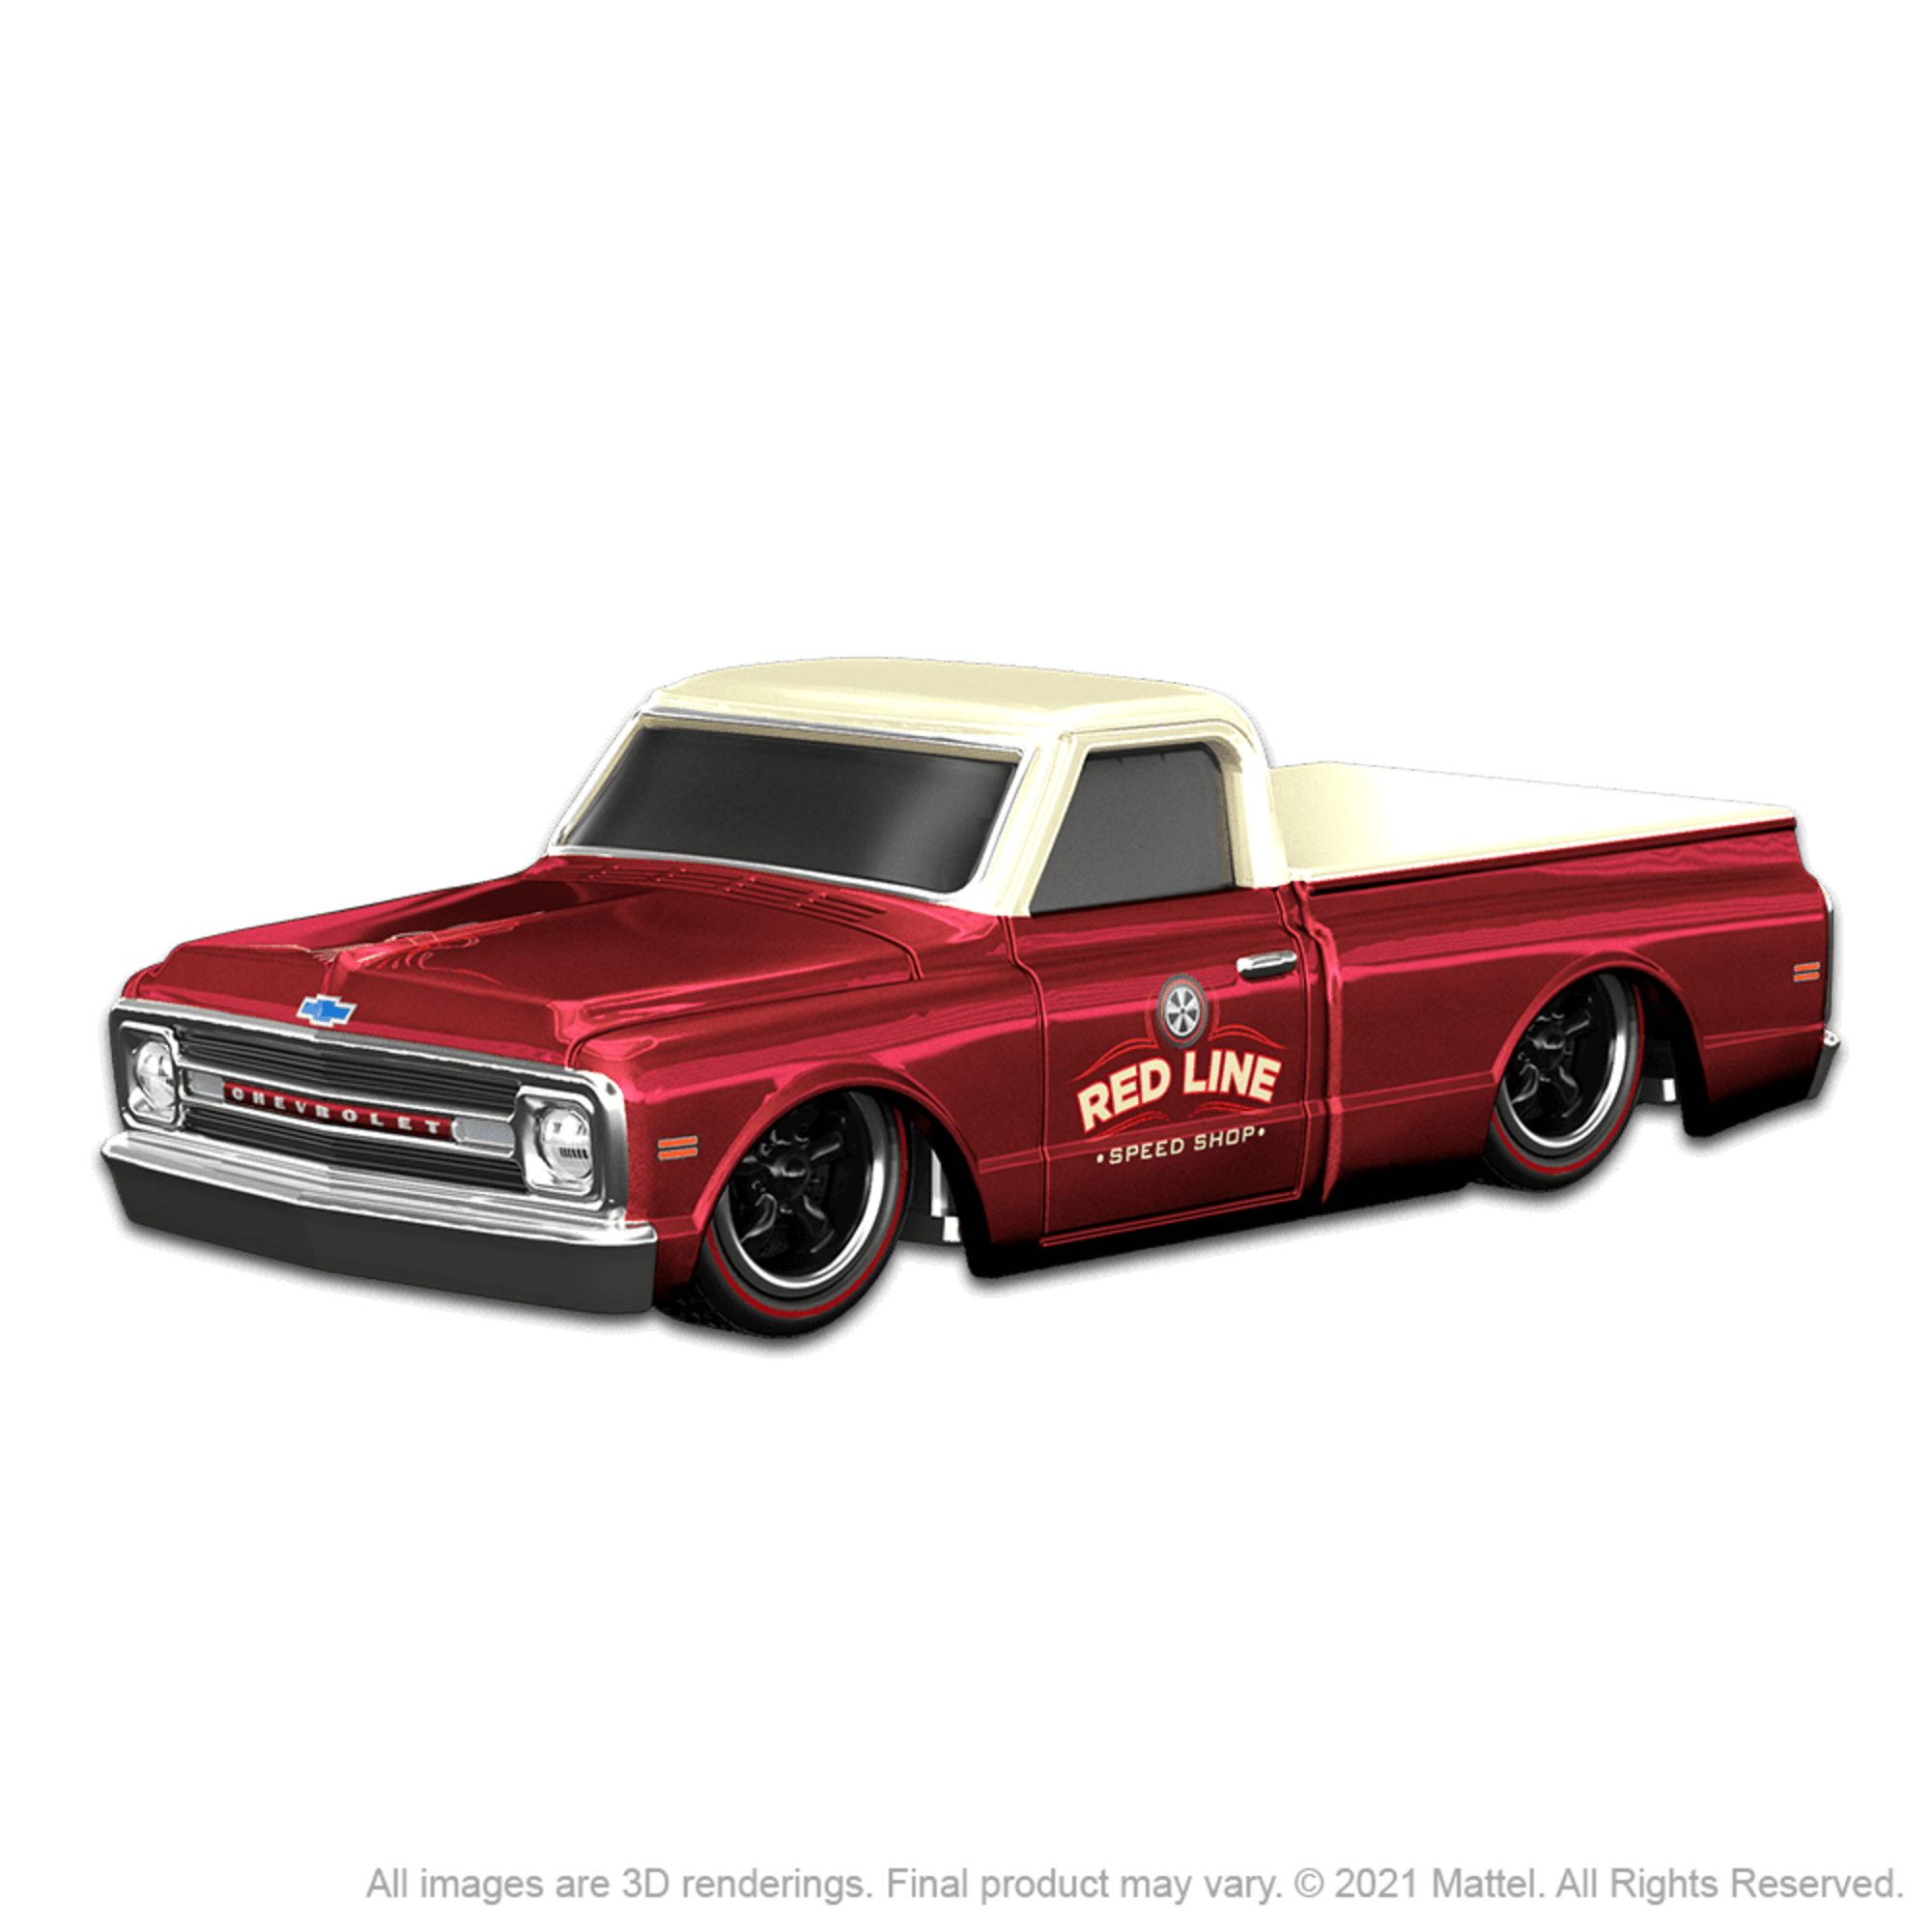 RLC sELECTIONs 1969 Chevy C-10 – Mattel Creations